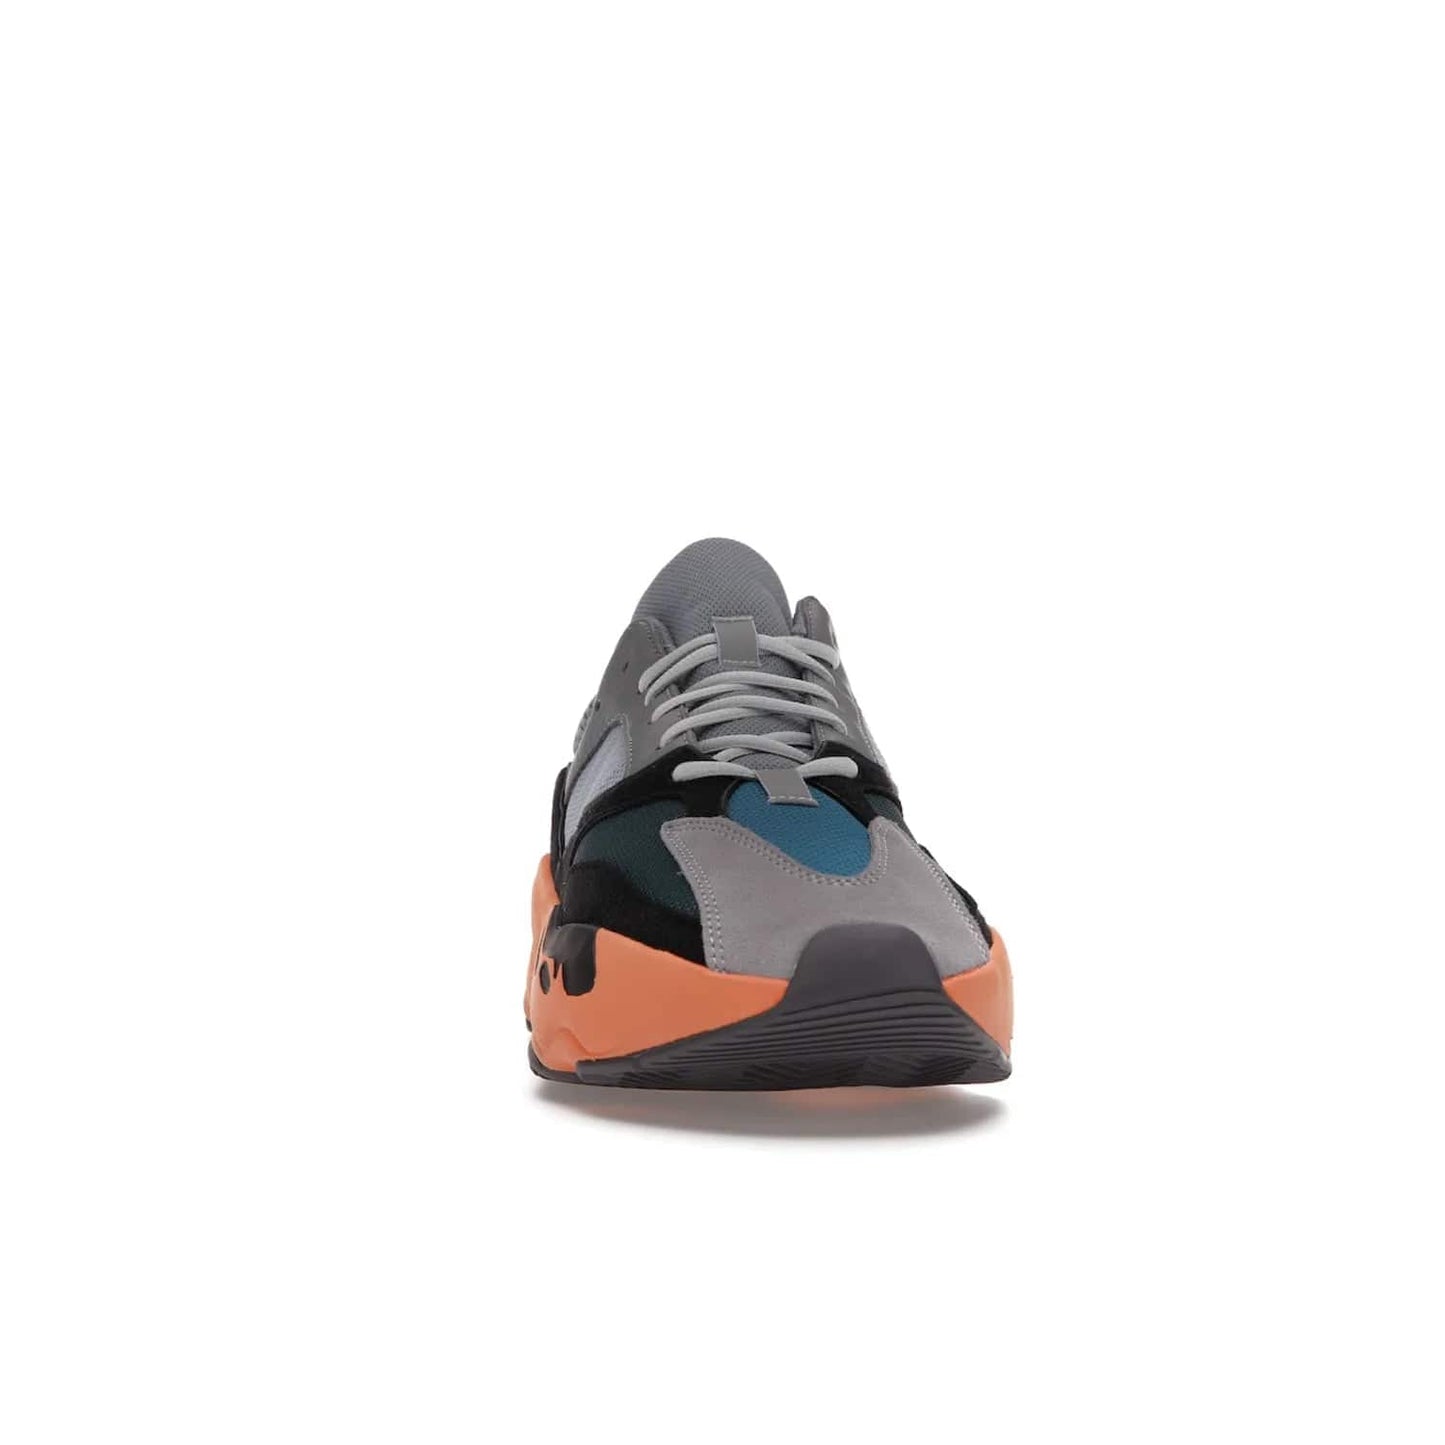 adidas Yeezy Boost 700 Wash Orange - Image 9 - Only at www.BallersClubKickz.com - Introducing the adidas Yeezy Boost 700 Wash Orange. Unique grey leather, suede, mesh upper and teal panels with a chunky Wash Orange Boost midsole. Release October 2021, make a statement today!